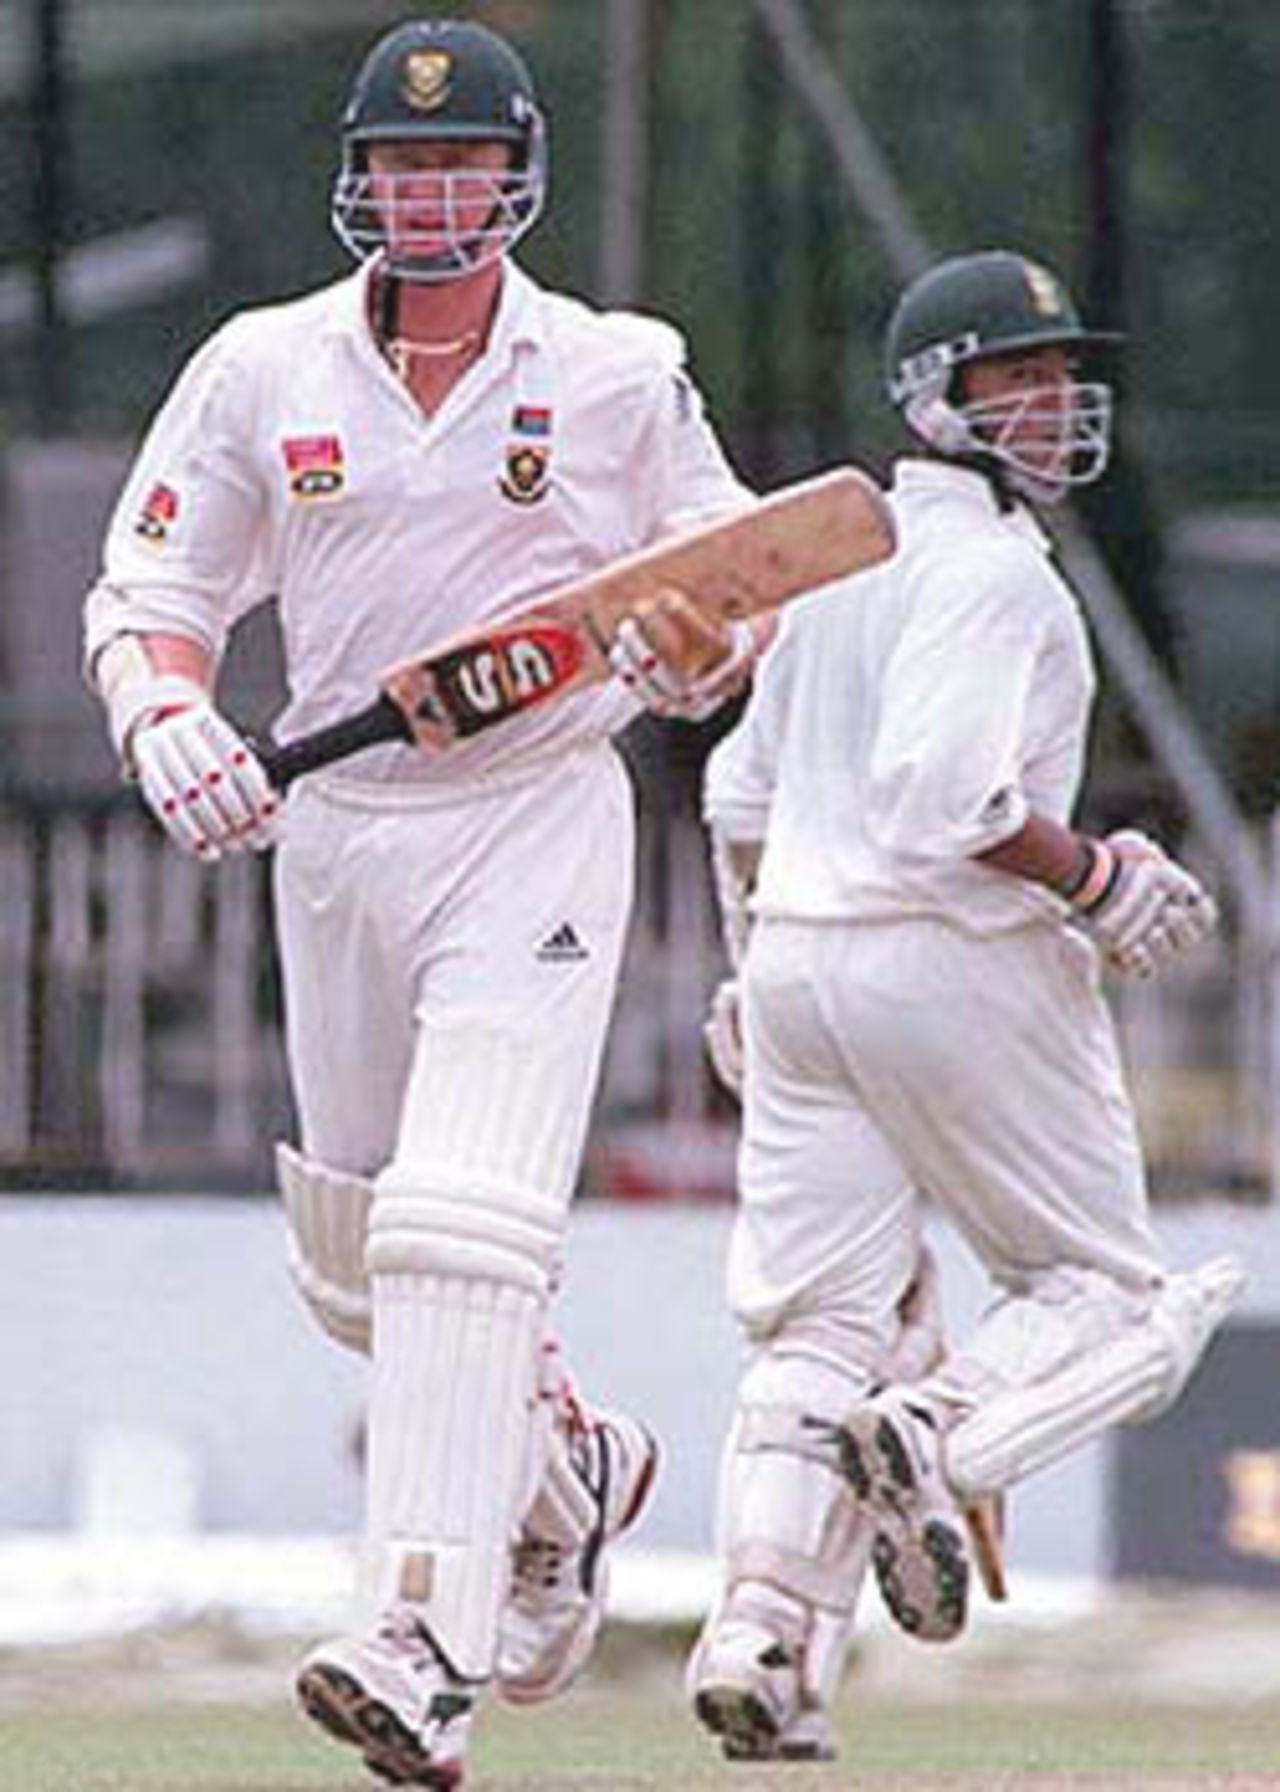 South Africa's top scorer Lance Klusener takes a quick single while batting with Paul Adams, South Africa in Sri Lanka, 2000/01, 3rd Test, Sri Lanka v South Africa, Sinhalese Sports Club Ground, Colombo, 06-10 August 2000 (Day 2).